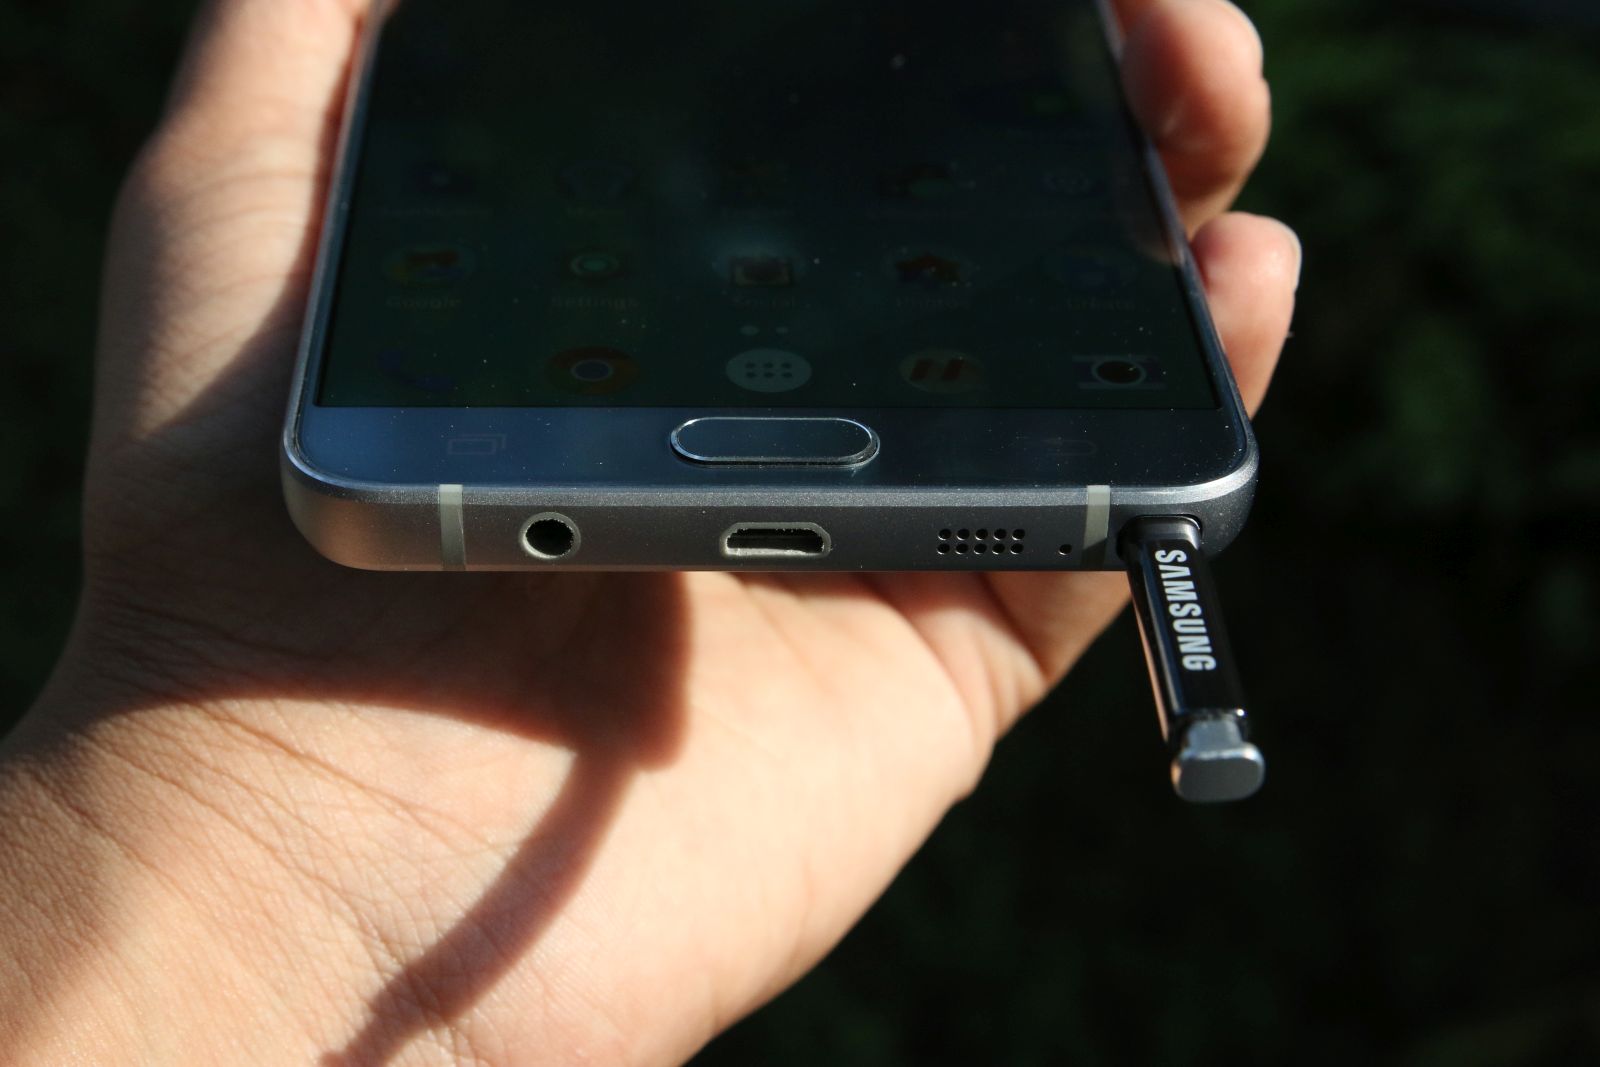 Galaxy Note 5 Gets An Update With Battery Other Improvements